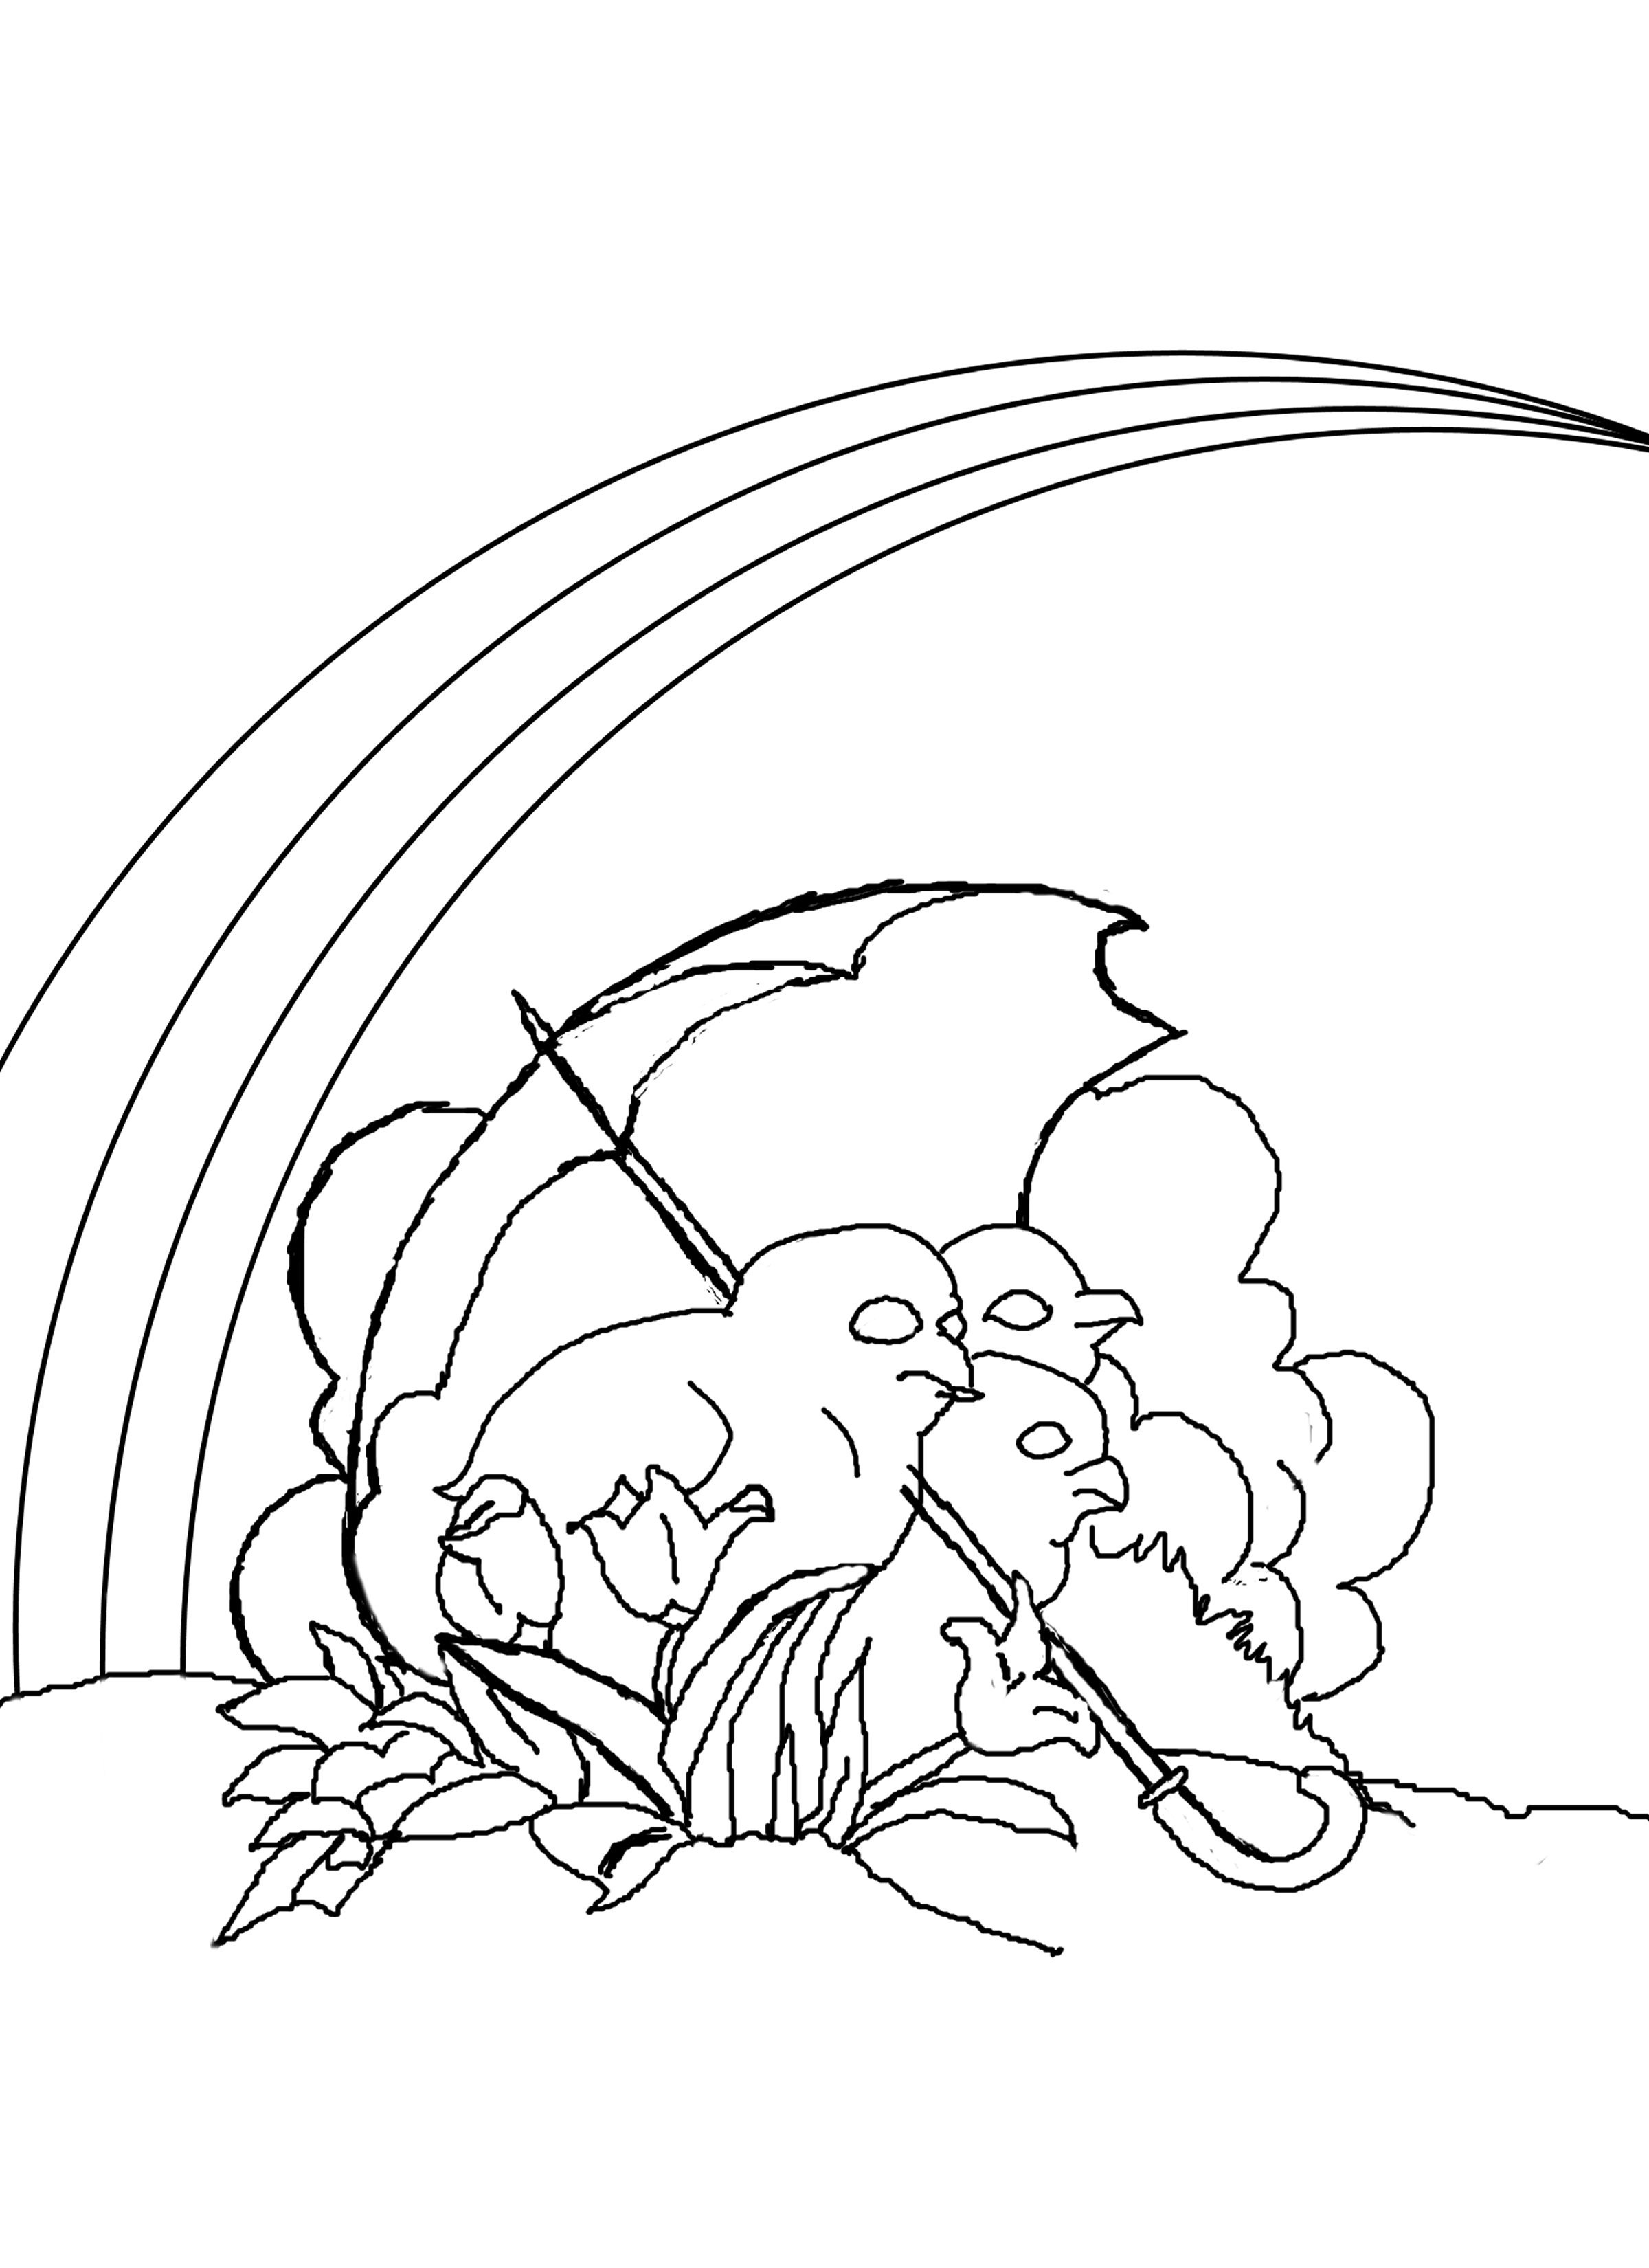 rainbow-with-clouds-coloring-page-free-printable-coloring-pages